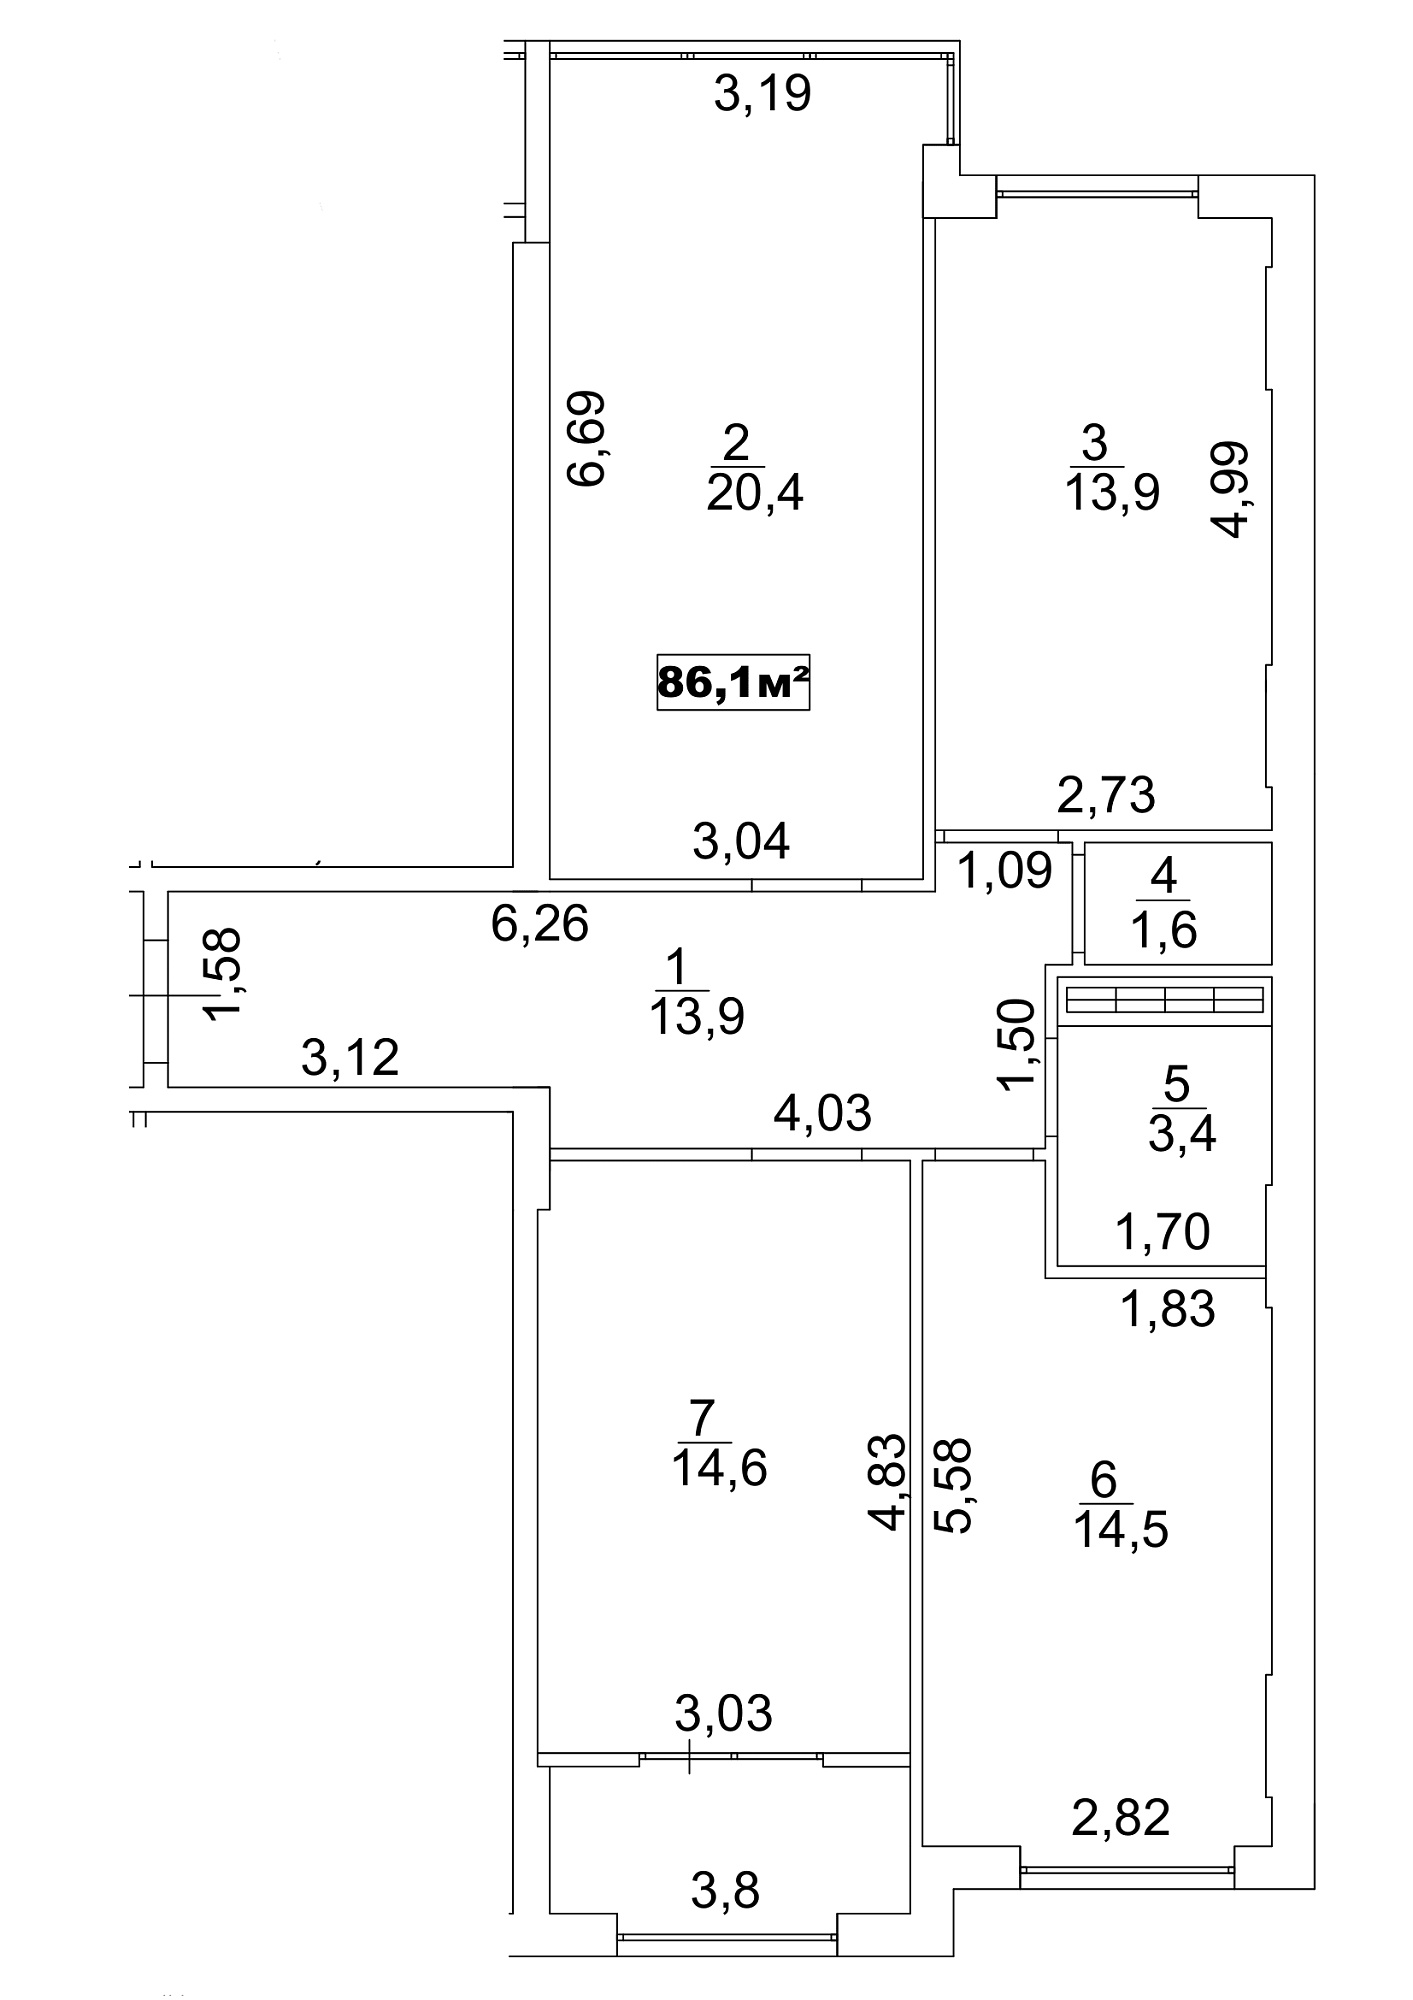 Planning 3-rm flats area 86.1m2, AB-13-09/00076.